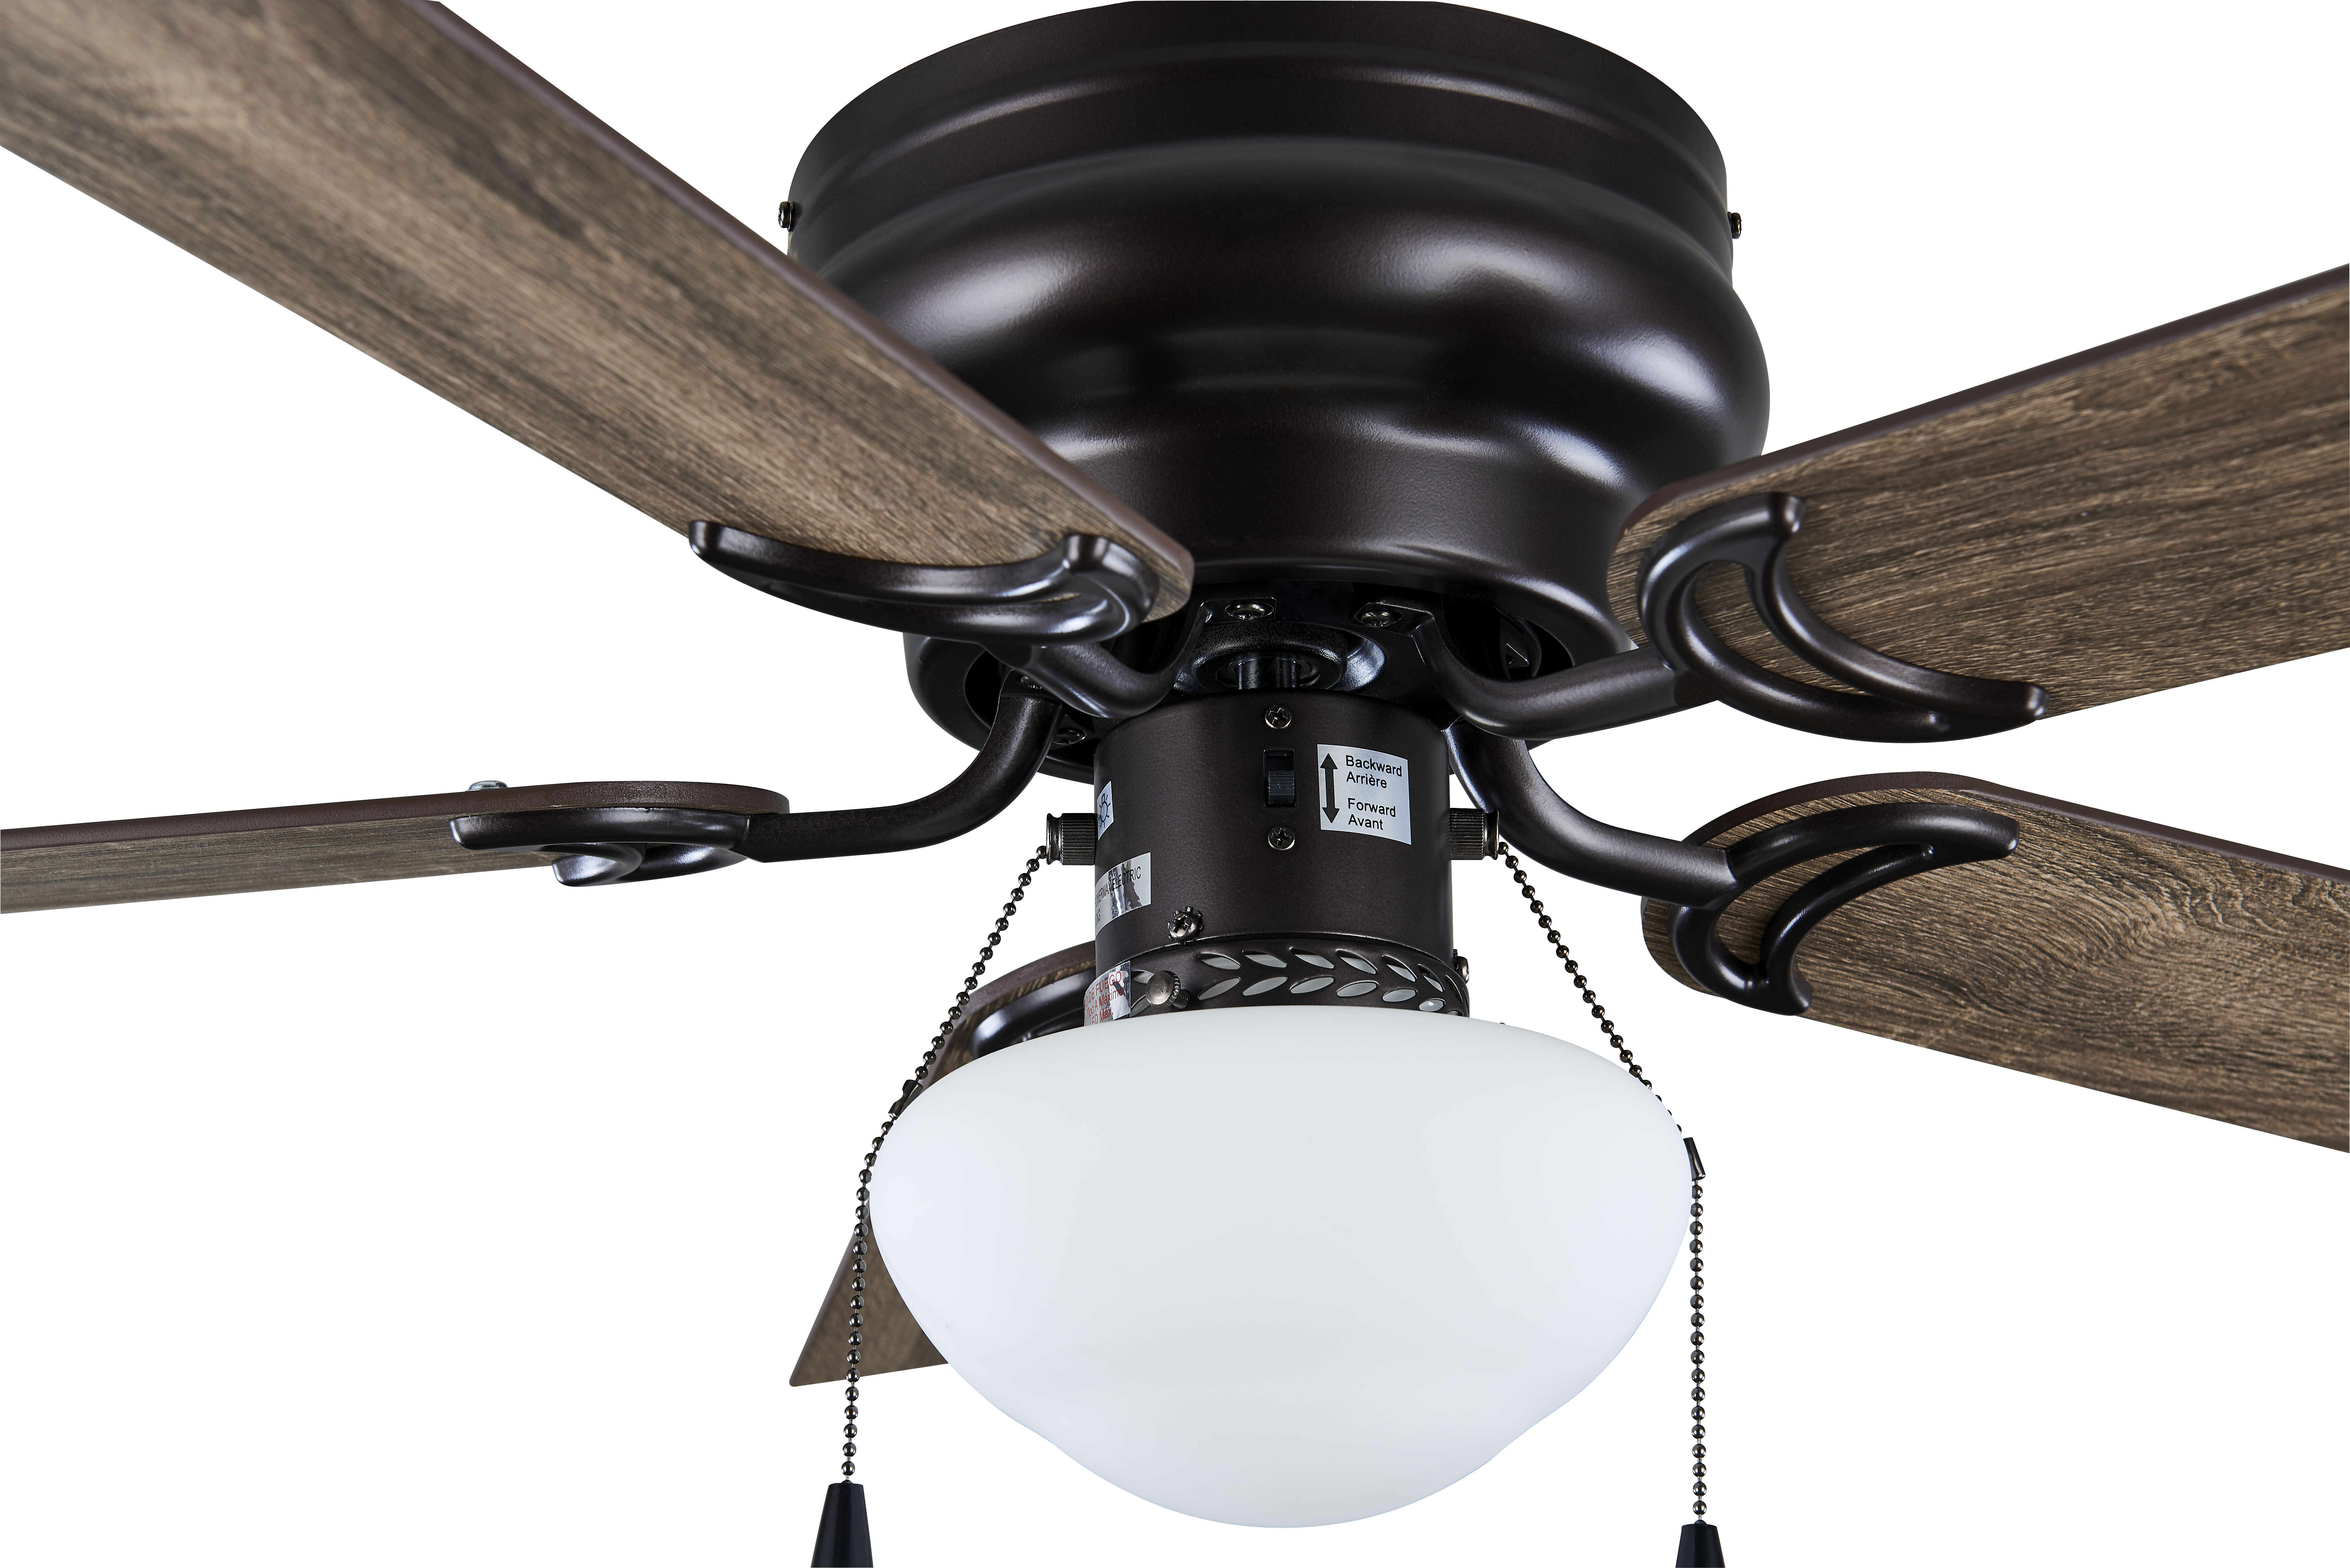 Mainstays 44" Hugger Indoor Ceiling Fan with Single Light, Bronze, 5 Blades, LED Bulb, Reverse Airflow - image 5 of 8